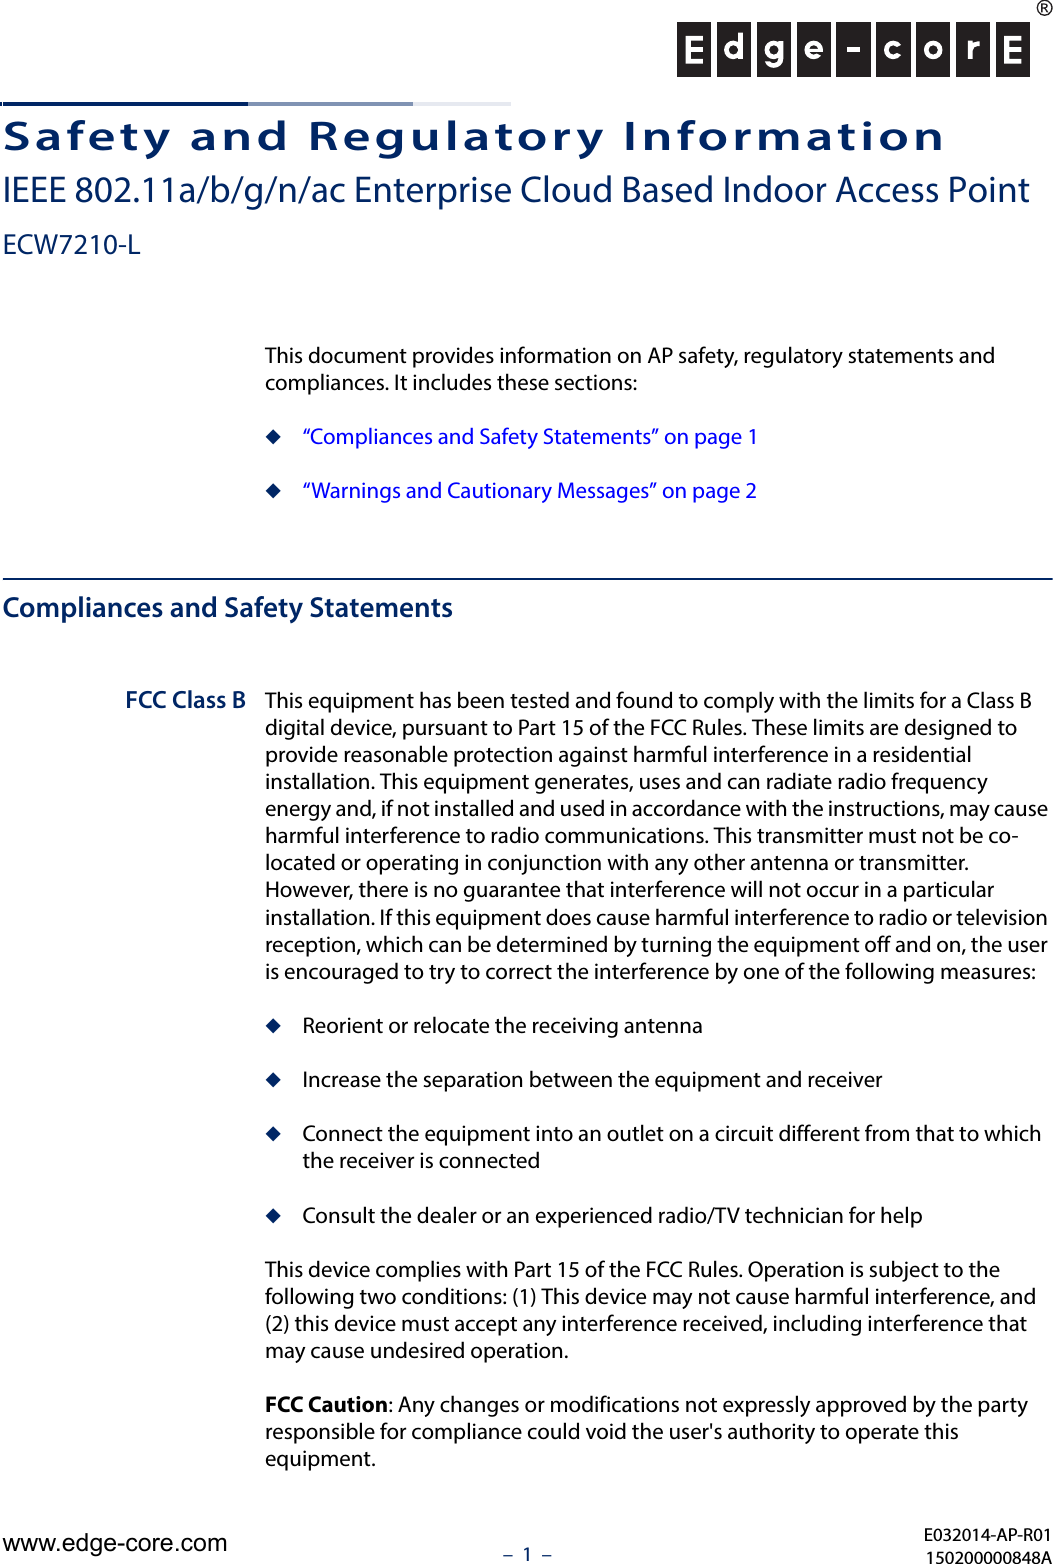 –  1  –Safety and Regulatory InformationIEEE 802.11a/b/g/n/ac Enterprise Cloud Based Indoor Access PointECW7210-LThis document provides information on AP safety, regulatory statements and compliances. It includes these sections:◆“Compliances and Safety Statements” on page 1◆“Warnings and Cautionary Messages” on page 2Compliances and Safety StatementsFCC Class B This equipment has been tested and found to comply with the limits for a Class B digital device, pursuant to Part 15 of the FCC Rules. These limits are designed to provide reasonable protection against harmful interference in a residential installation. This equipment generates, uses and can radiate radio frequency energy and, if not installed and used in accordance with the instructions, may cause harmful interference to radio communications. This transmitter must not be co-located or operating in conjunction with any other antenna or transmitter. However, there is no guarantee that interference will not occur in a particular installation. If this equipment does cause harmful interference to radio or television reception, which can be determined by turning the equipment off and on, the user is encouraged to try to correct the interference by one of the following measures:◆Reorient or relocate the receiving antenna◆Increase the separation between the equipment and receiver◆Connect the equipment into an outlet on a circuit different from that to which the receiver is connected◆Consult the dealer or an experienced radio/TV technician for helpThis device complies with Part 15 of the FCC Rules. Operation is subject to the following two conditions: (1) This device may not cause harmful interference, and (2) this device must accept any interference received, including interference that may cause undesired operation.FCC Caution: Any changes or modifications not expressly approved by the party responsible for compliance could void the user&apos;s authority to operate this equipment. E032014-AP-R01150200000848Awww.edge-core.com